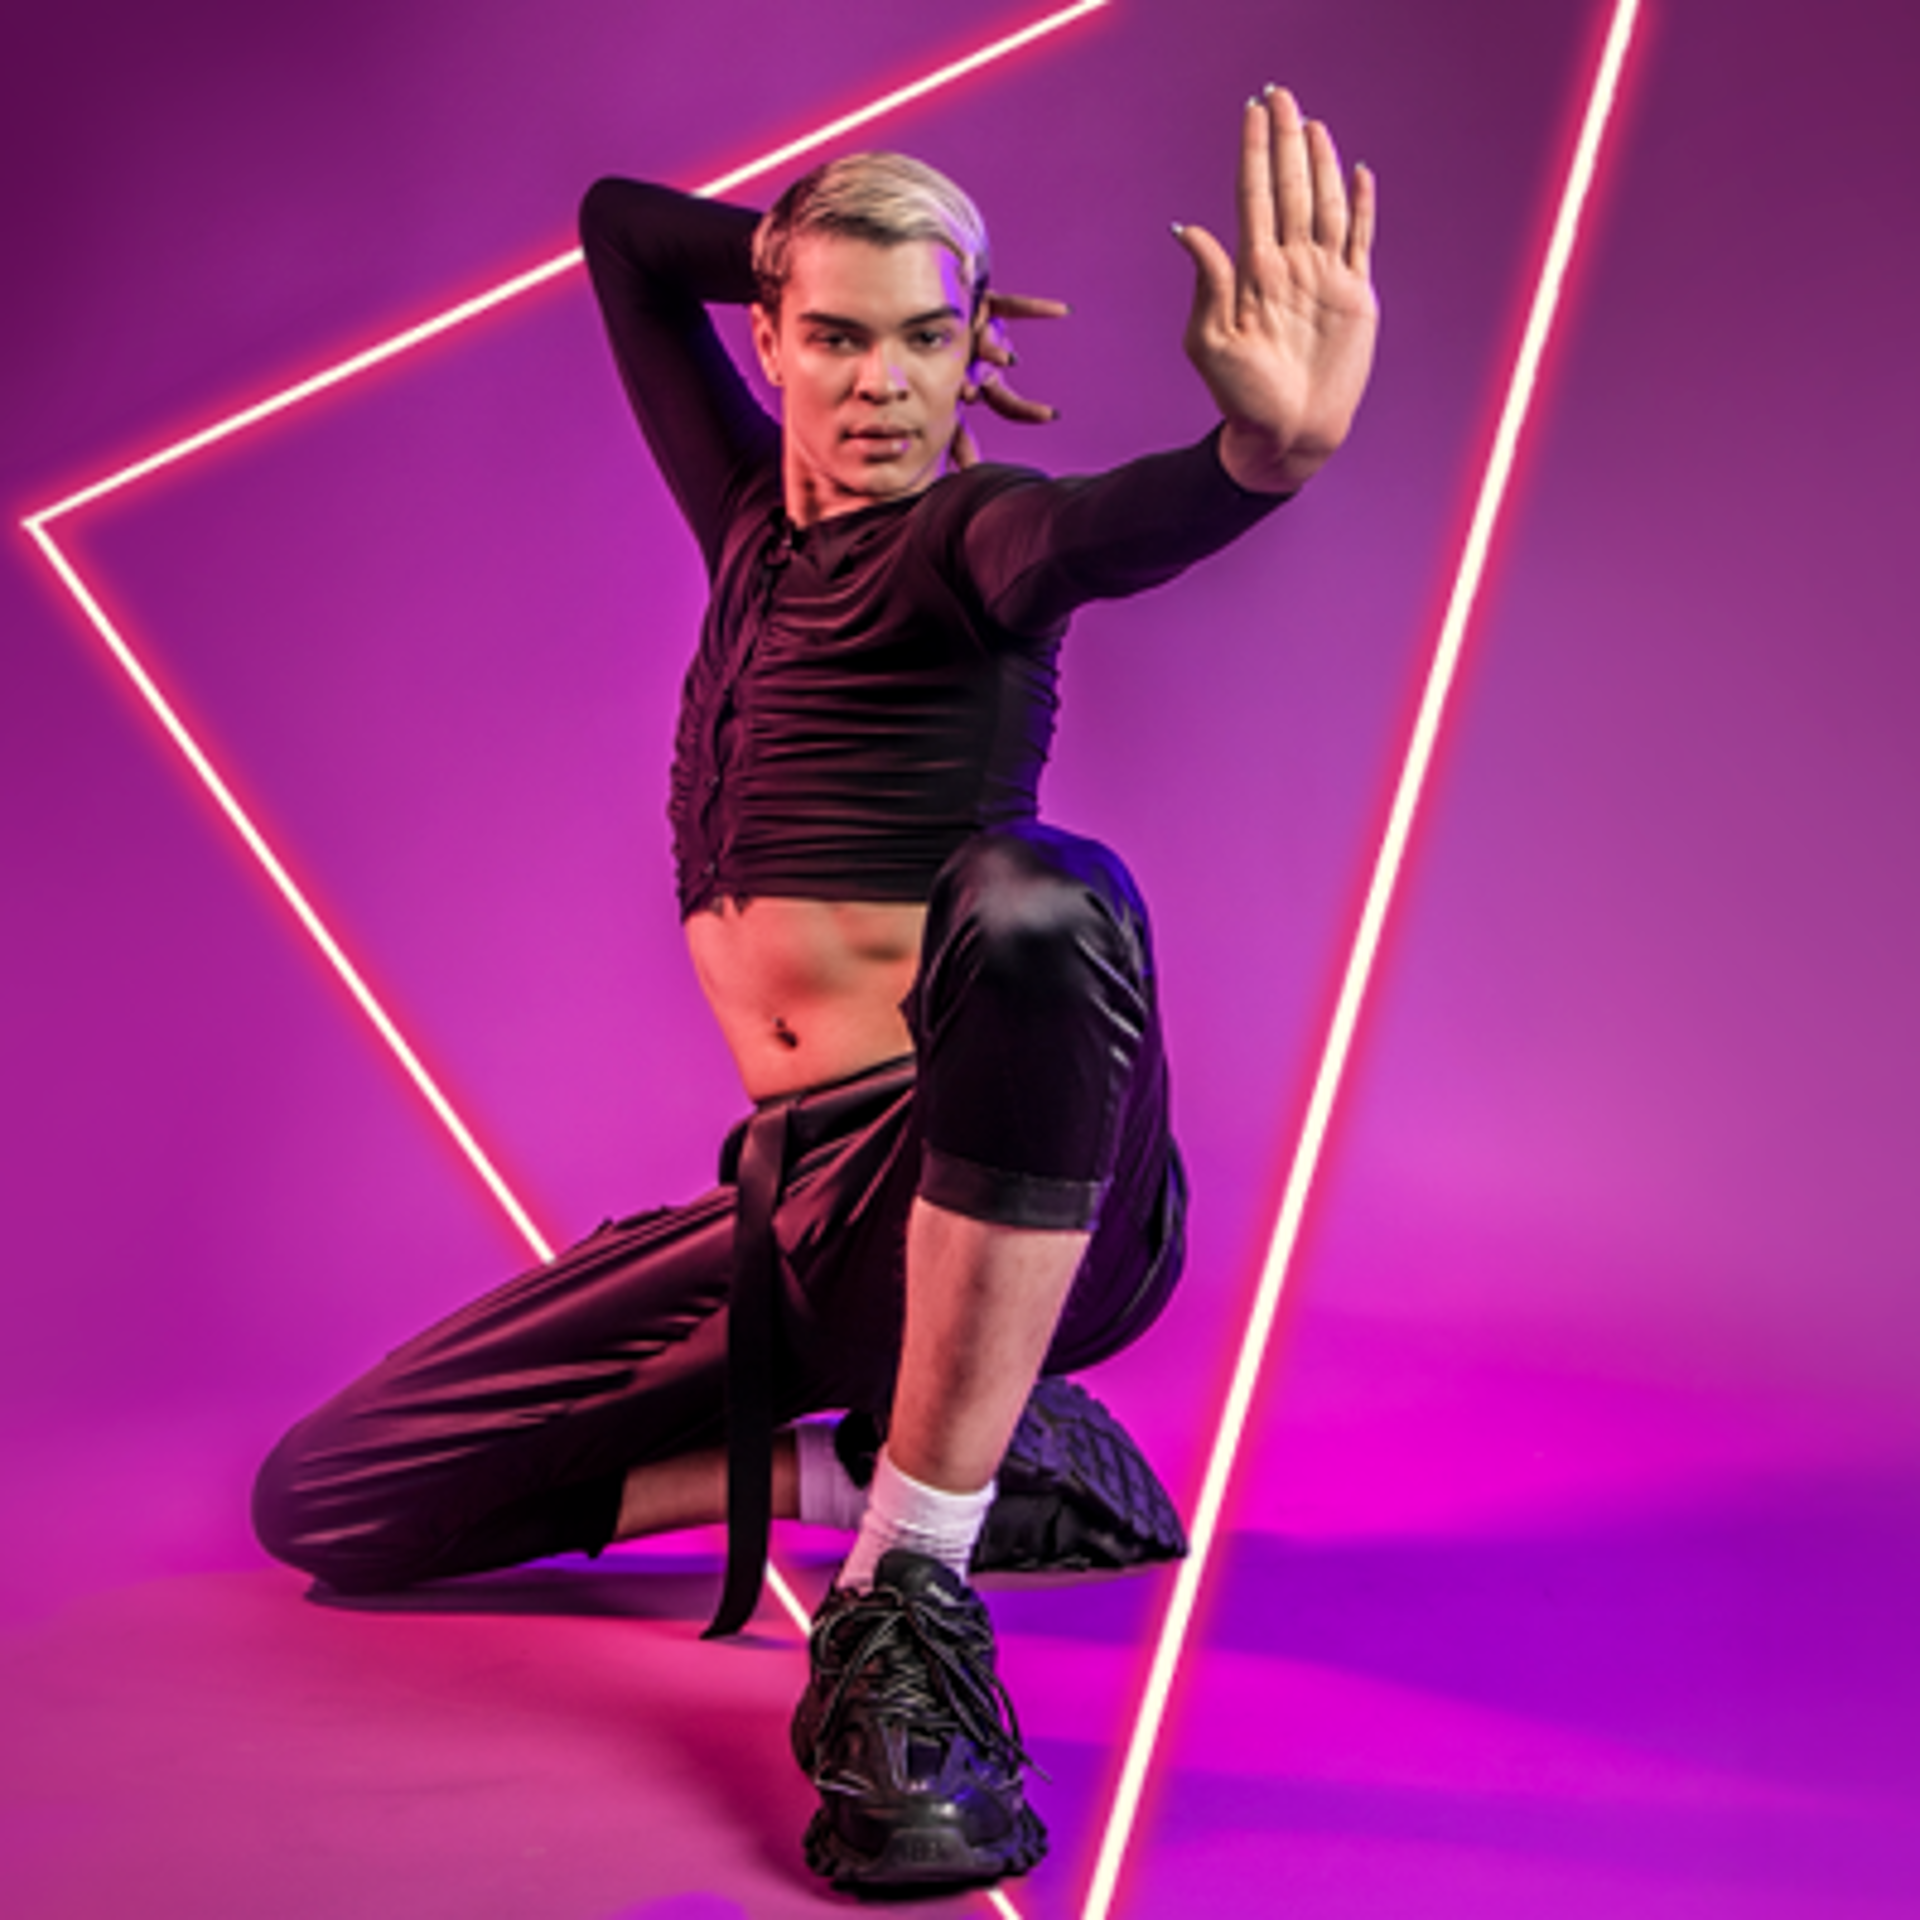 Global majority male LGBTQ+ vogue dancer with slick back blonde hair, kneeling with one hand behind head and the other hand stretched out gesturing stop. On bright purple photo background.